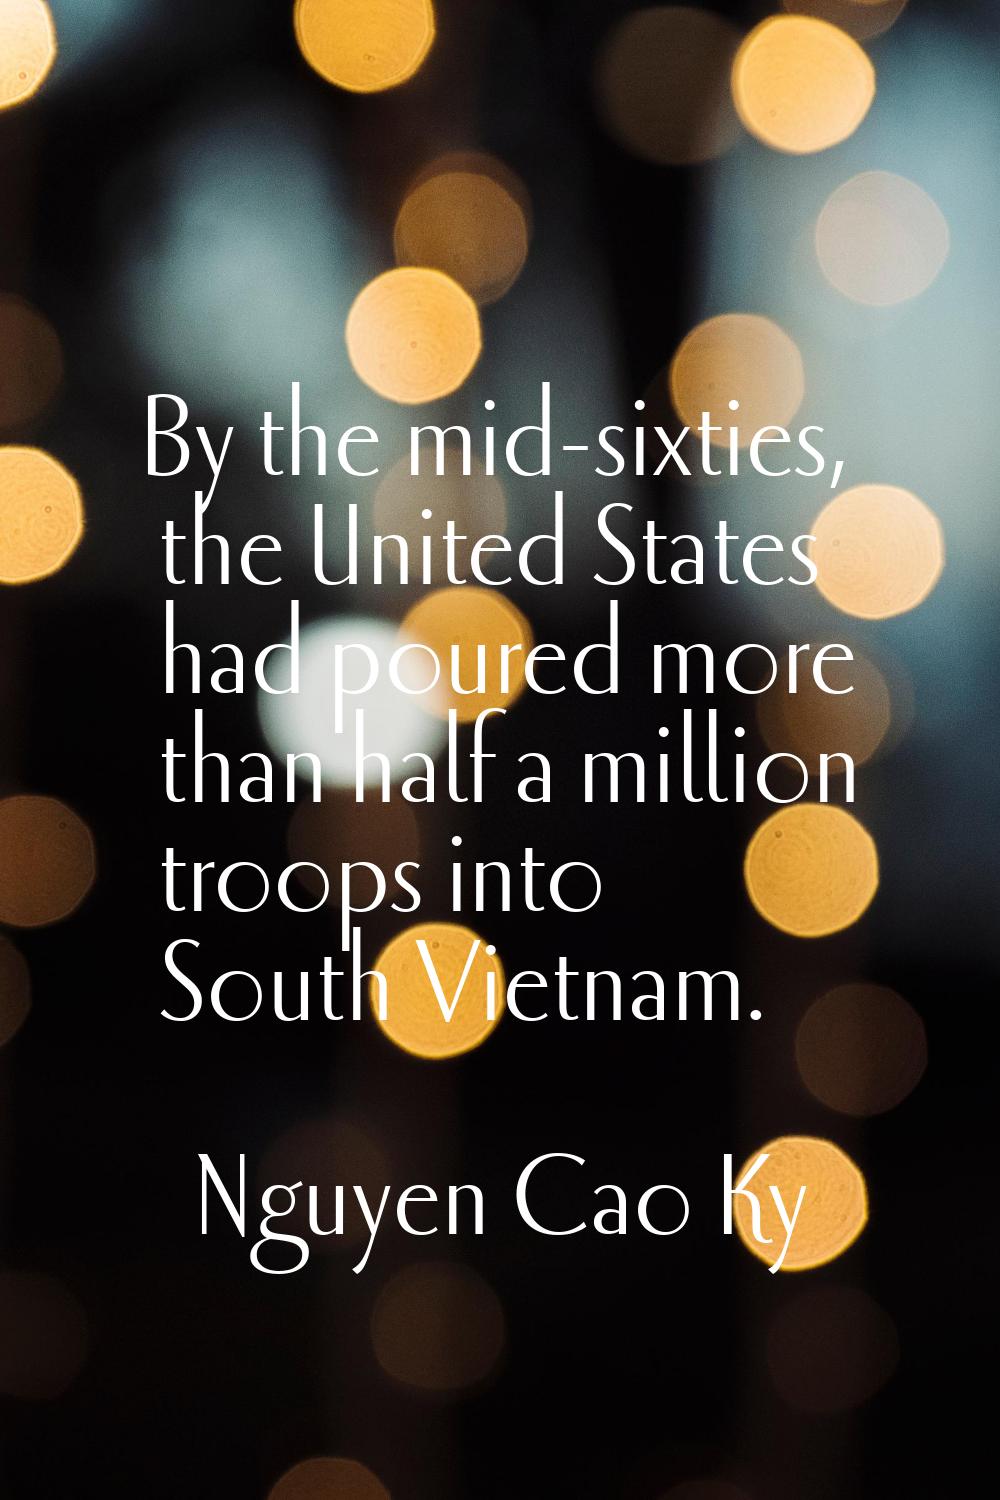 By the mid-sixties, the United States had poured more than half a million troops into South Vietnam